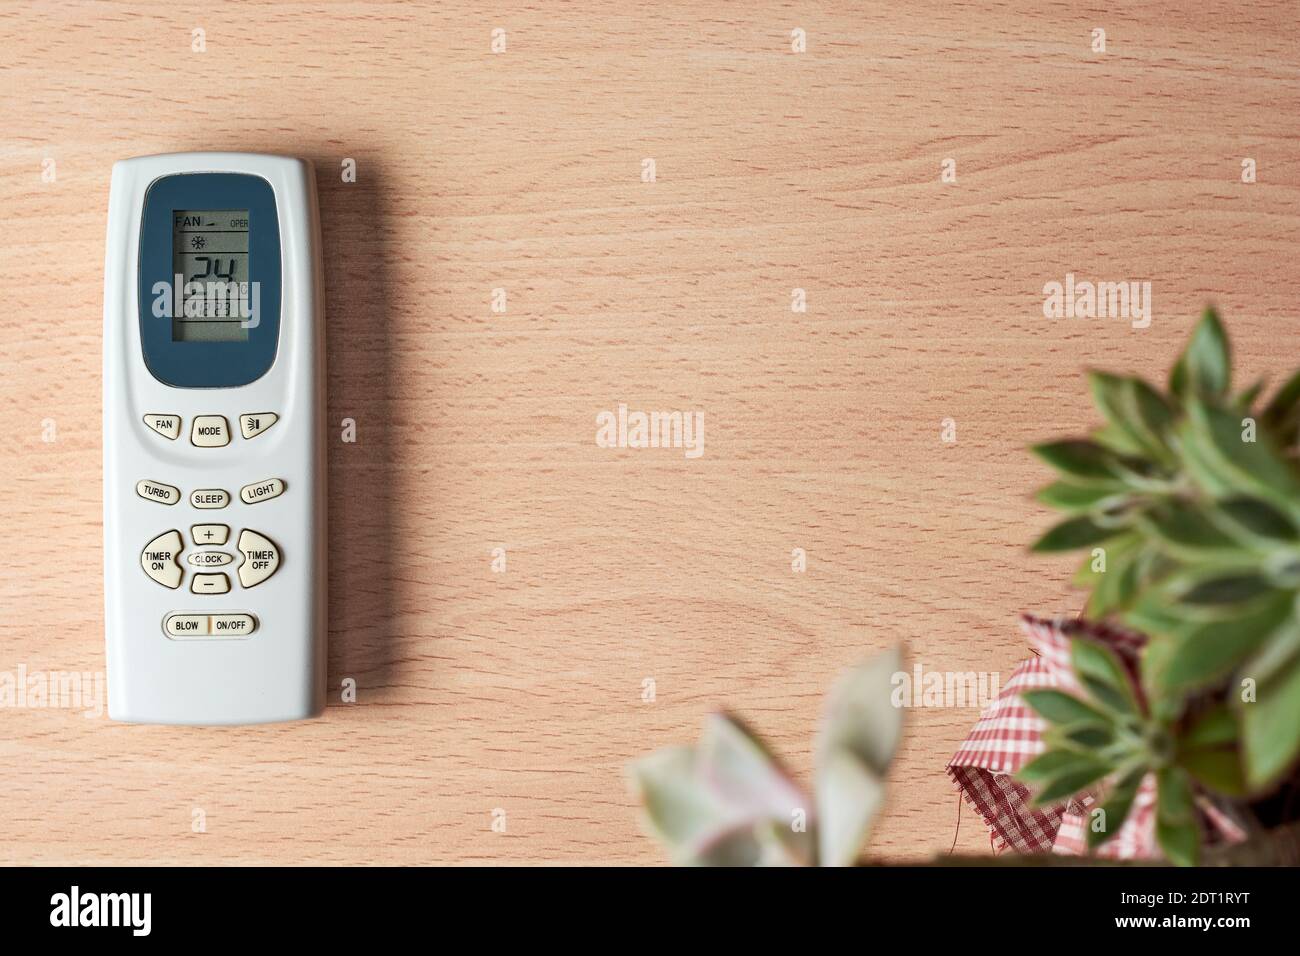 Air conditioner remote set at 24 degrees celsius on wooden desk with succulent plants. Concept of energy saving and environmental protection. Copy spa Stock Photo